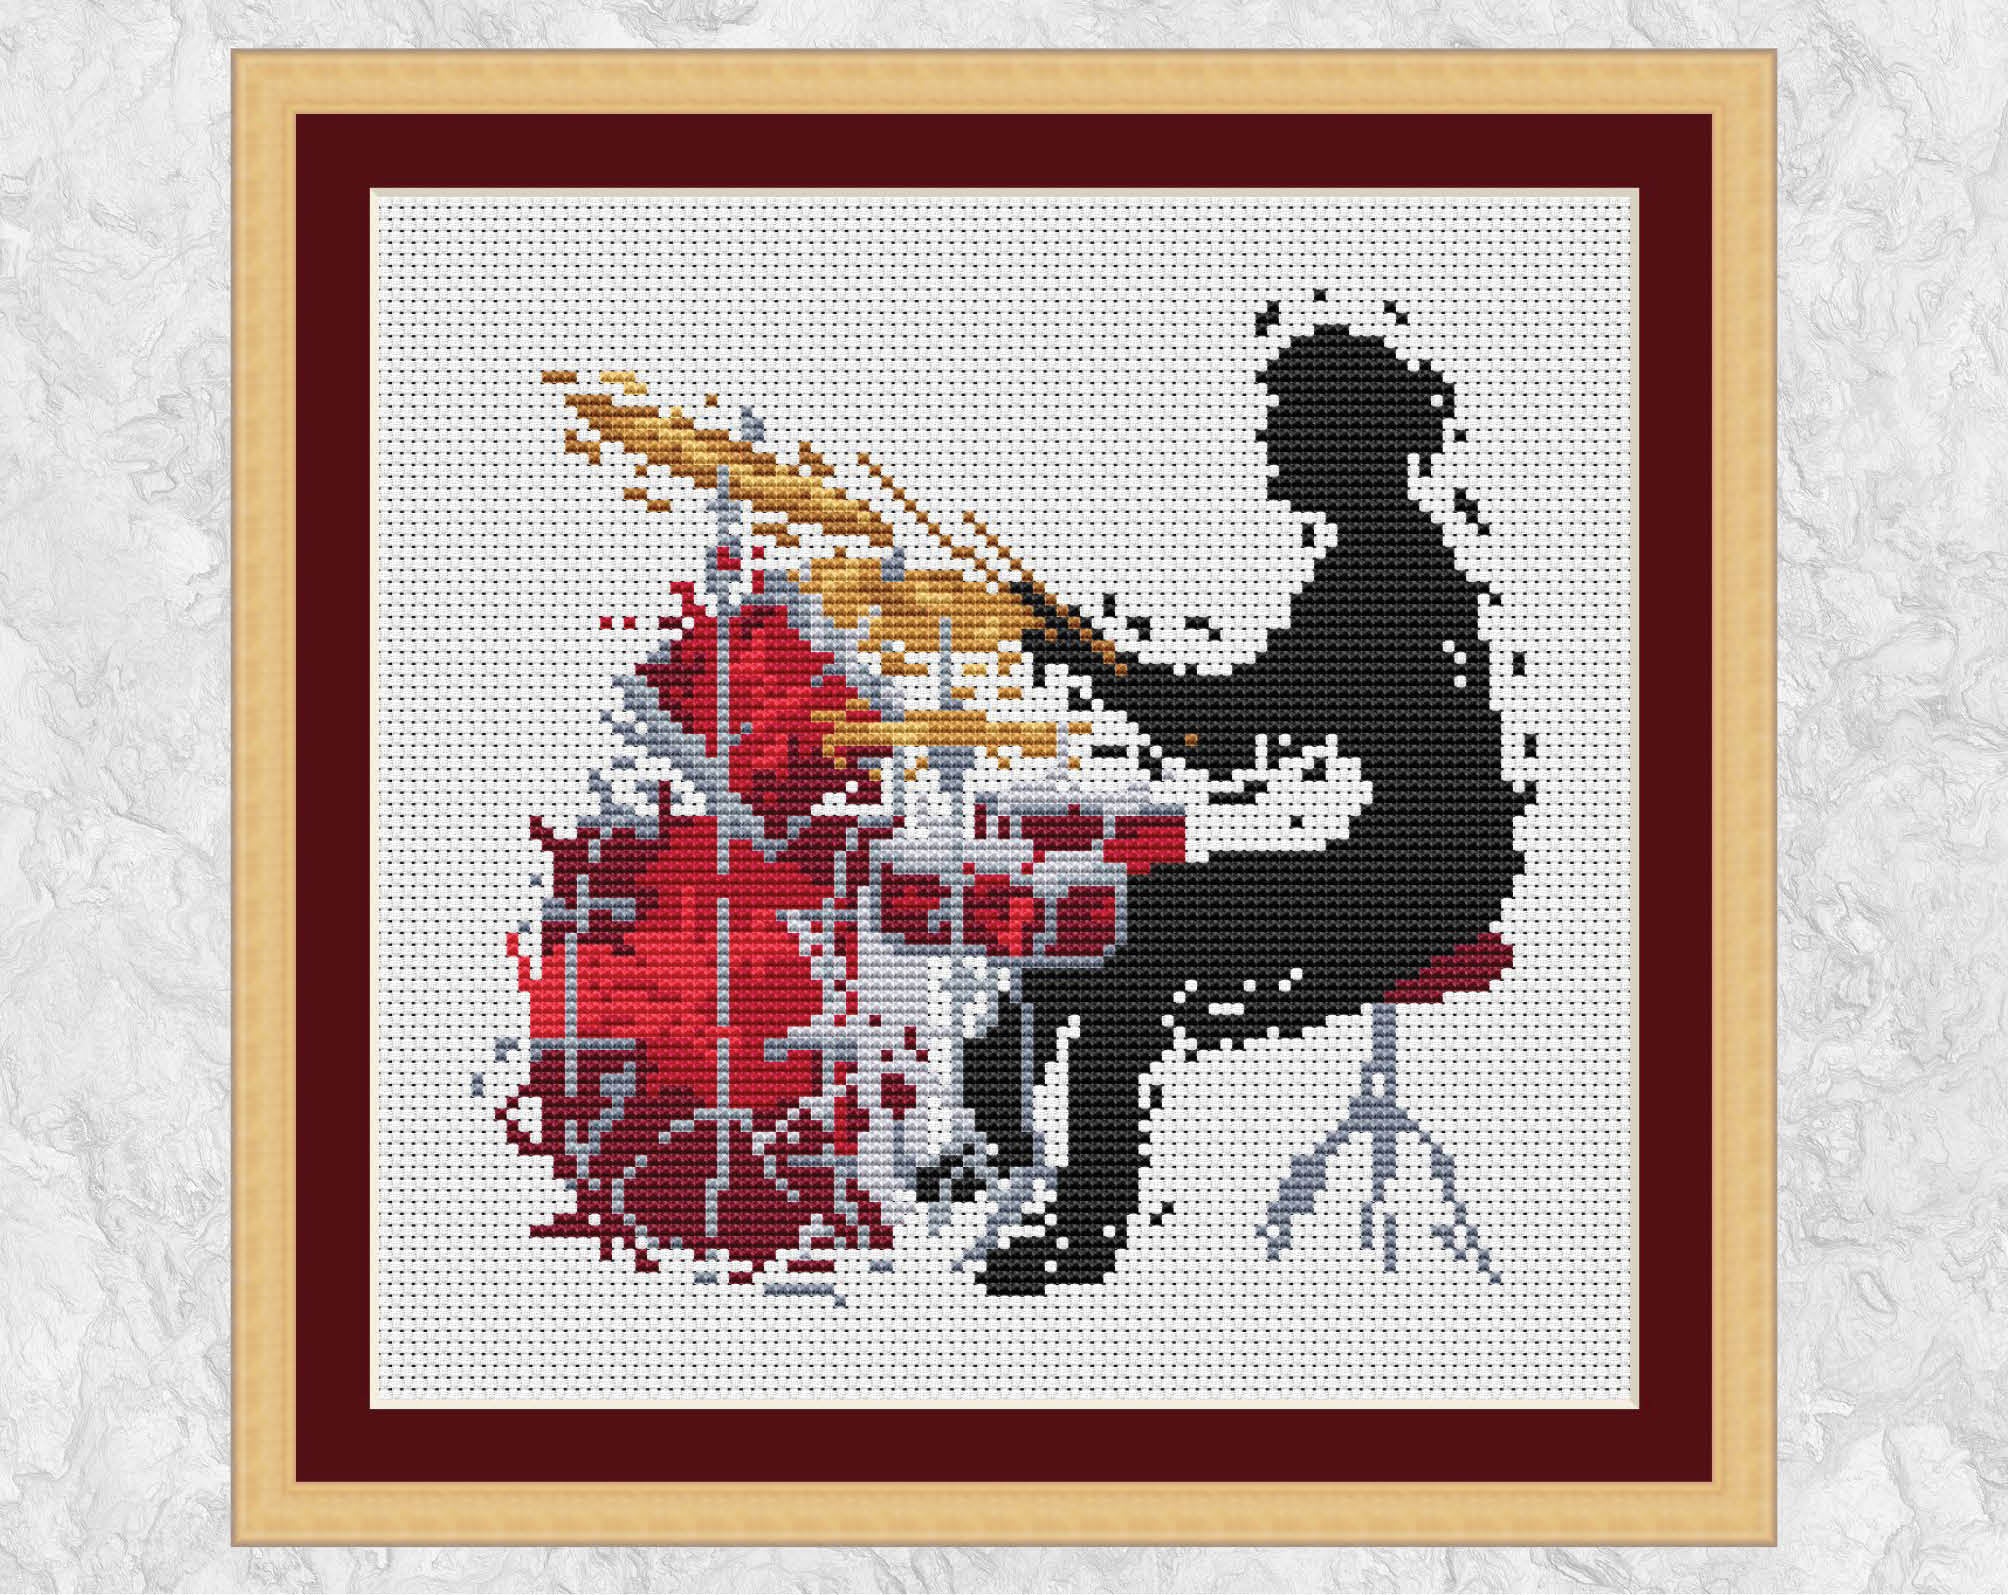 Female drummer music cross stitch pattern - with frame